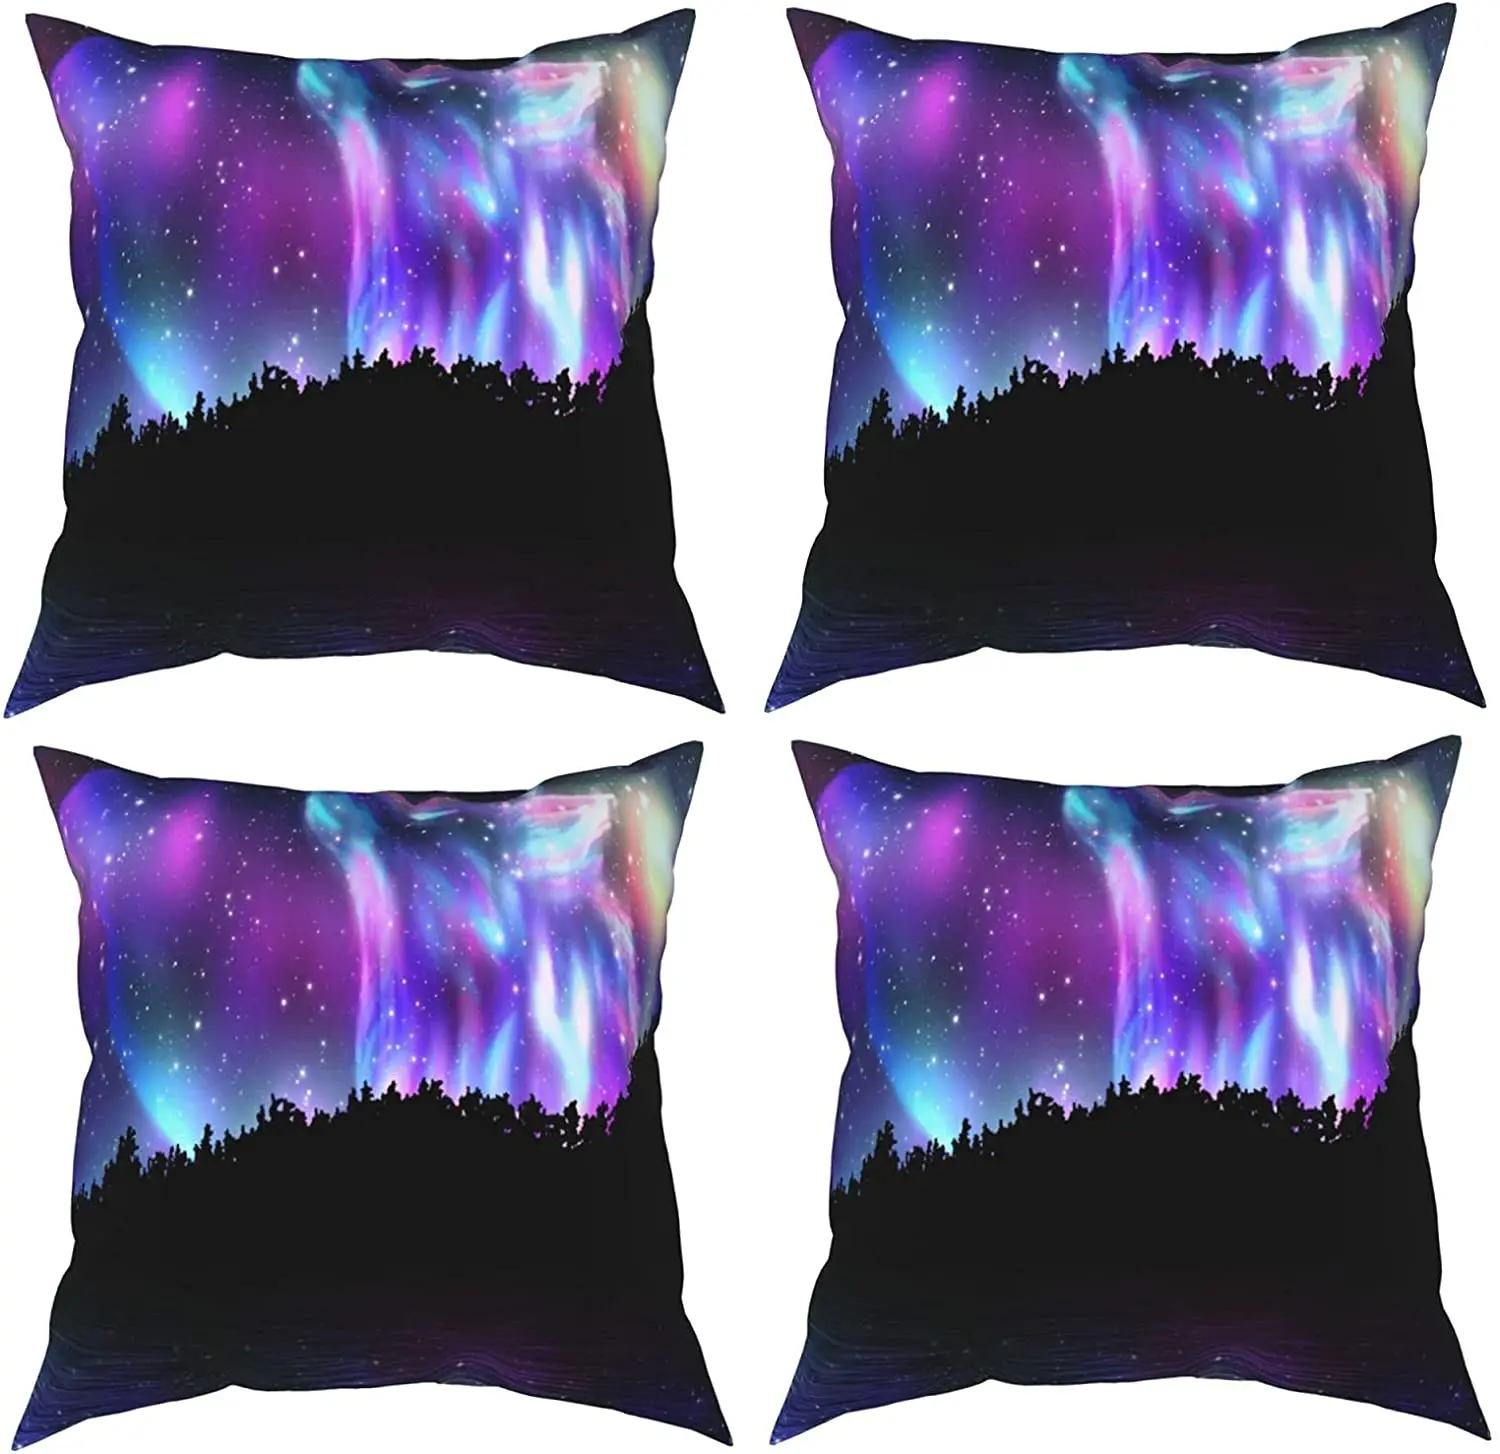 

Wolf Howling Spirit and Northern Lights Decoration Square Pillow Cover 18X18 Sofa Living Room Bag 4 Four Season Pillows